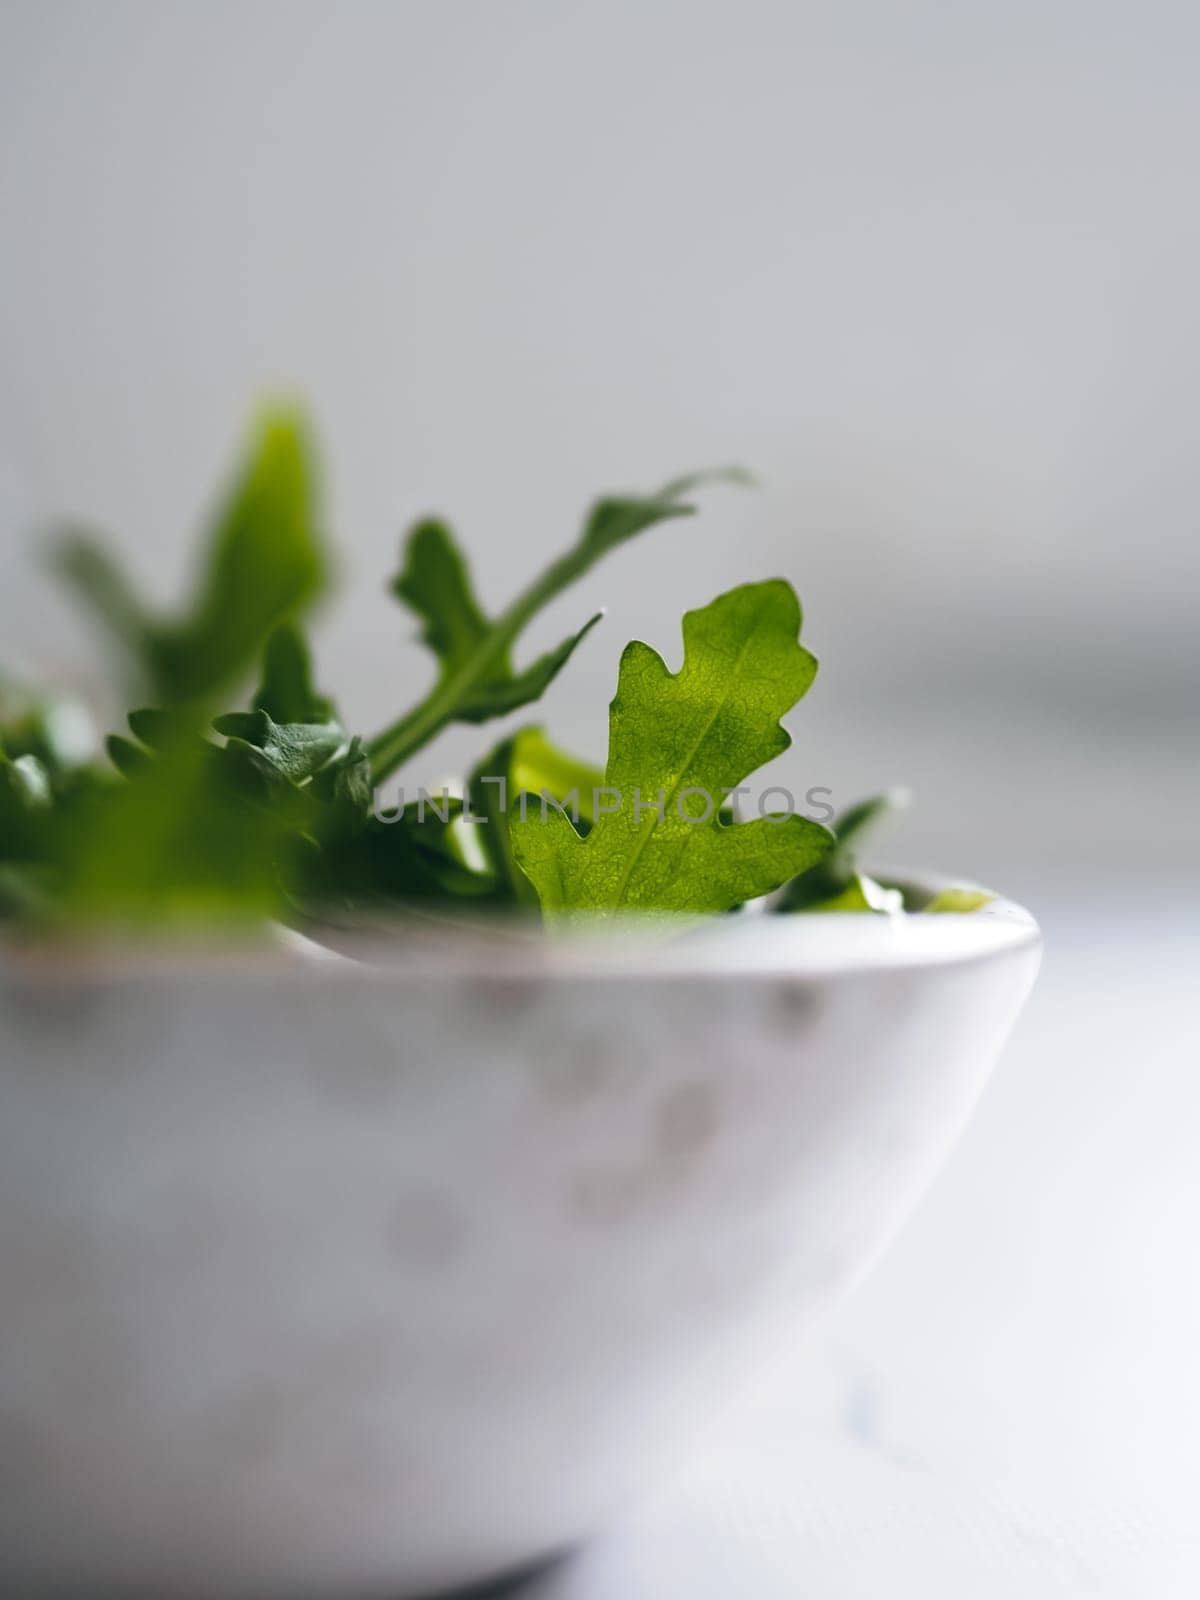 Arugula in craft ceramic boul. Arugula salad close up. Shallow DOF. Copy space for text. Fresh green arugula leaves in bowl on table. Vertical.